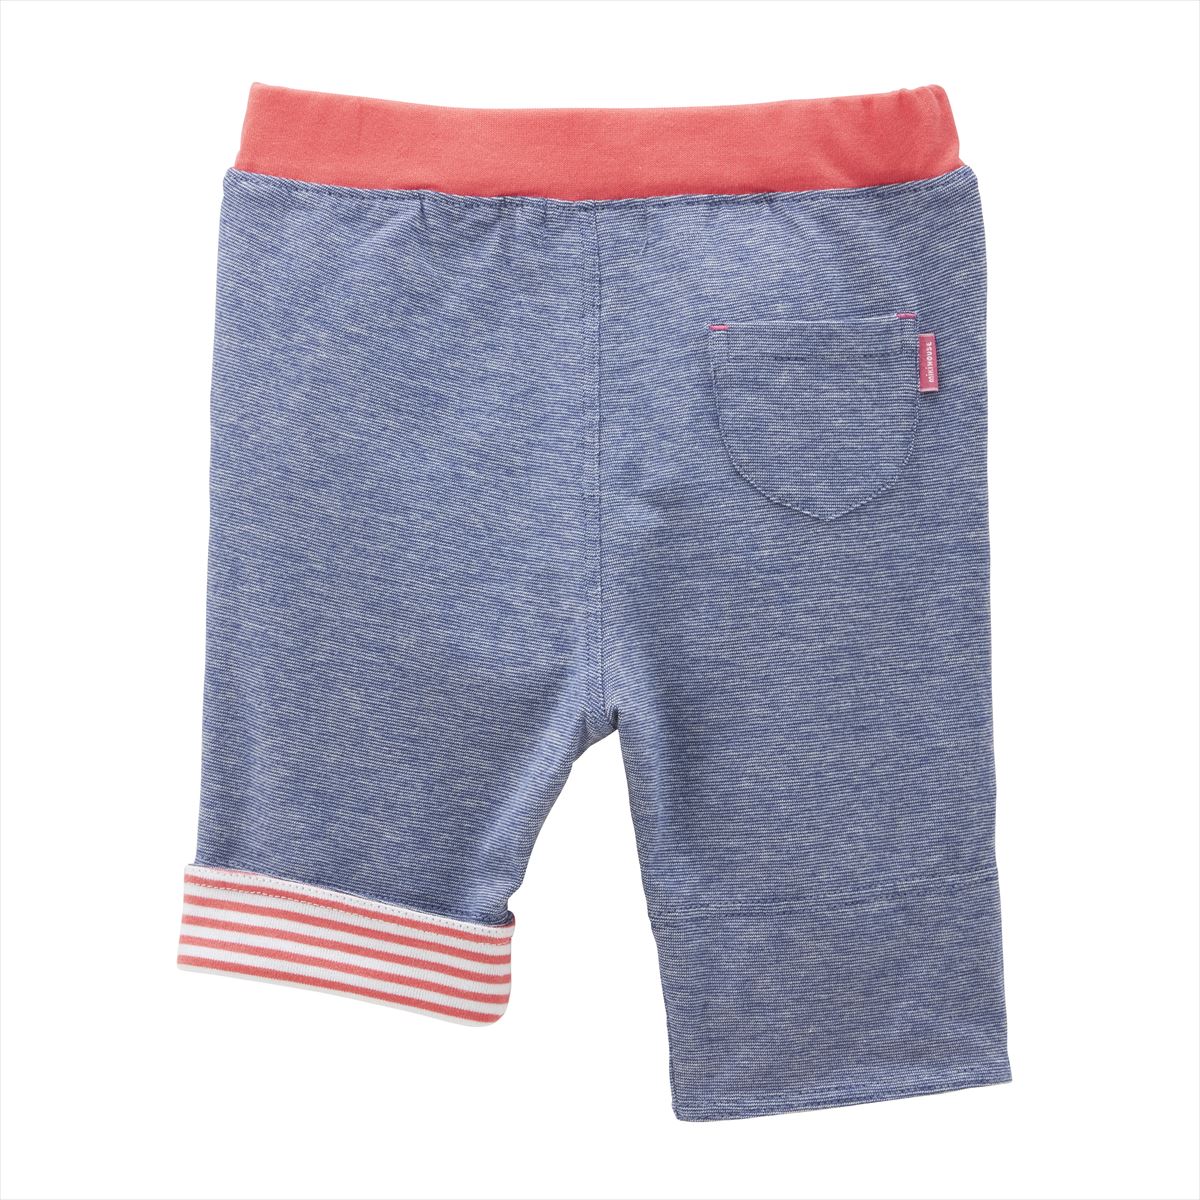 DOUBLE_B Everyday Boxer Set – MIKI HOUSE Outlet Official